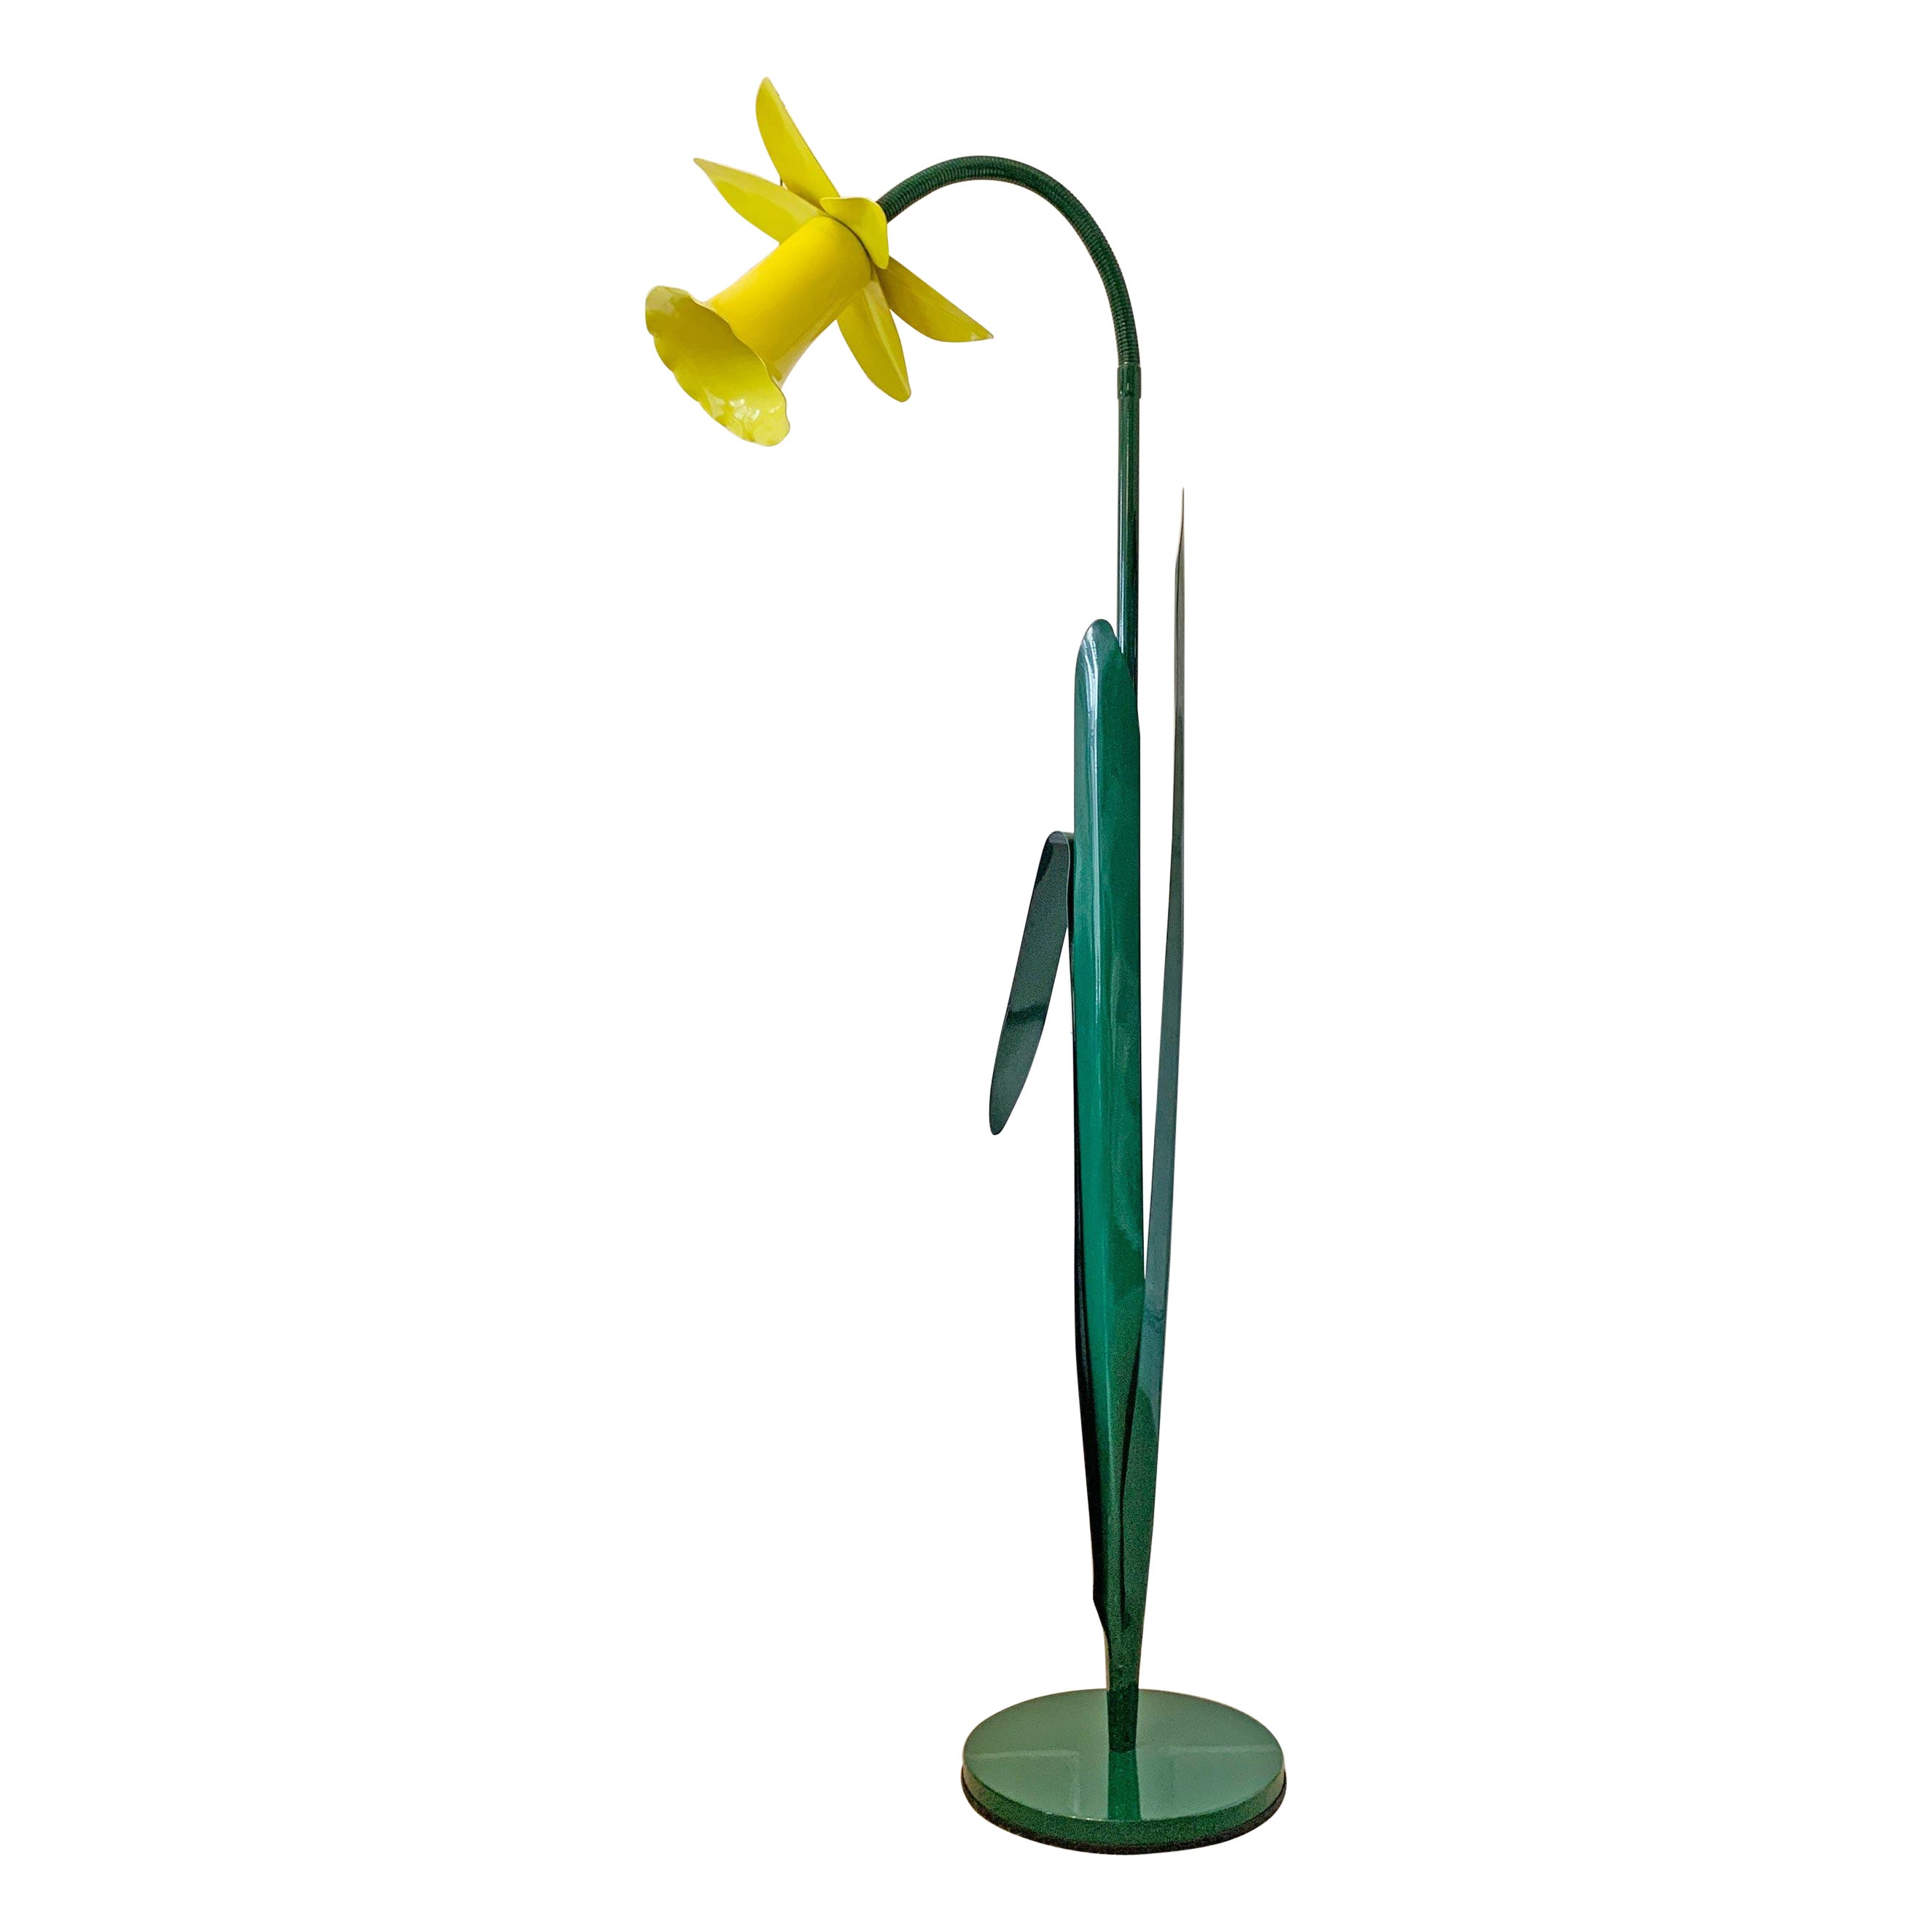 Bliss Daffodil Floor Lamp 1985 in Excellent Condition